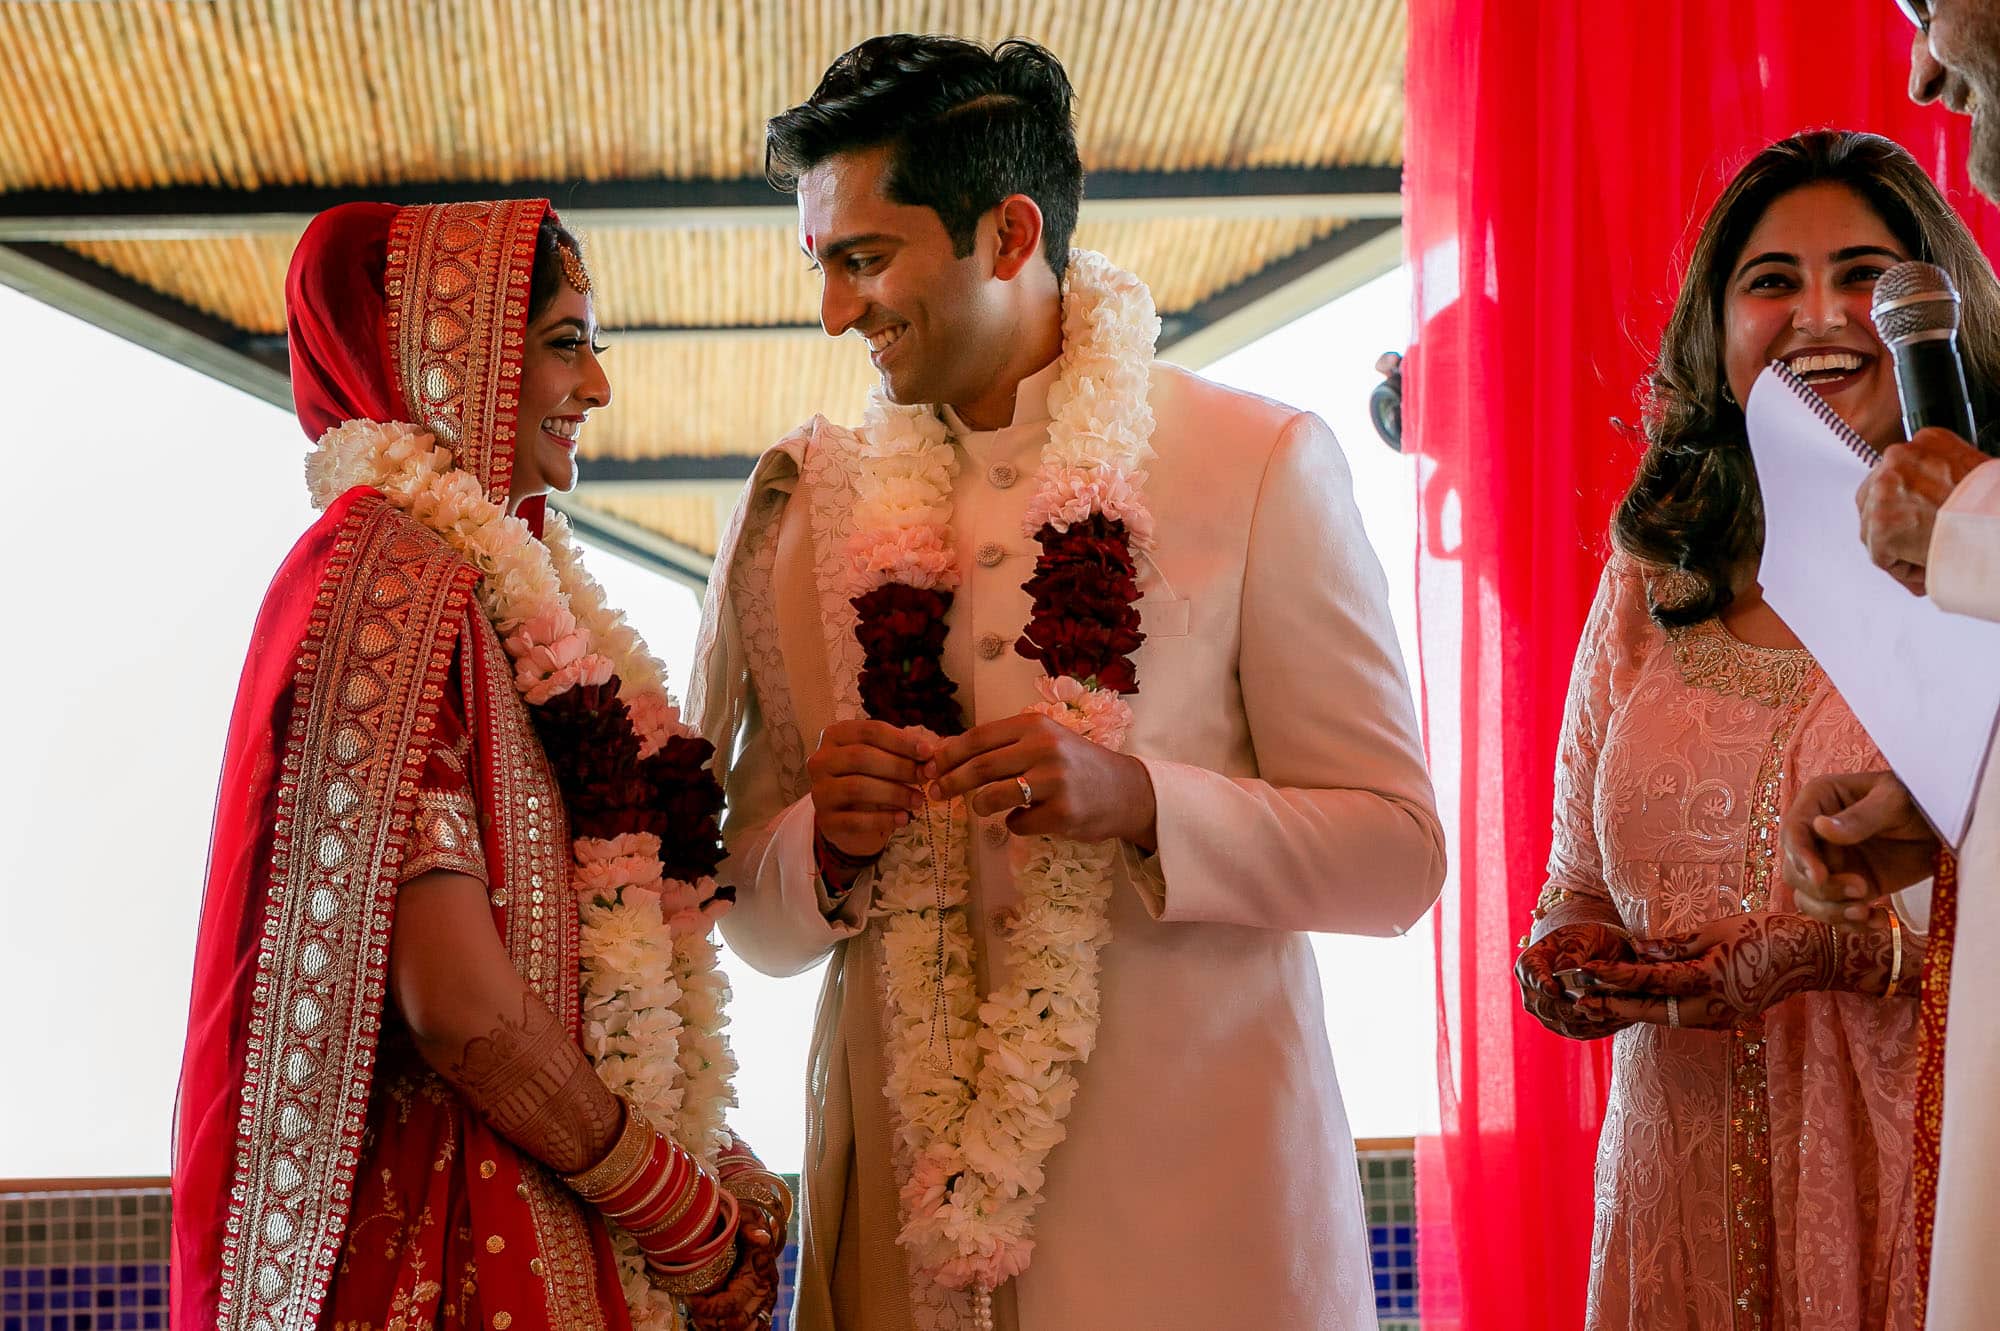 Exchanging rings at the traditional Hindu Muslim wedding ceremony